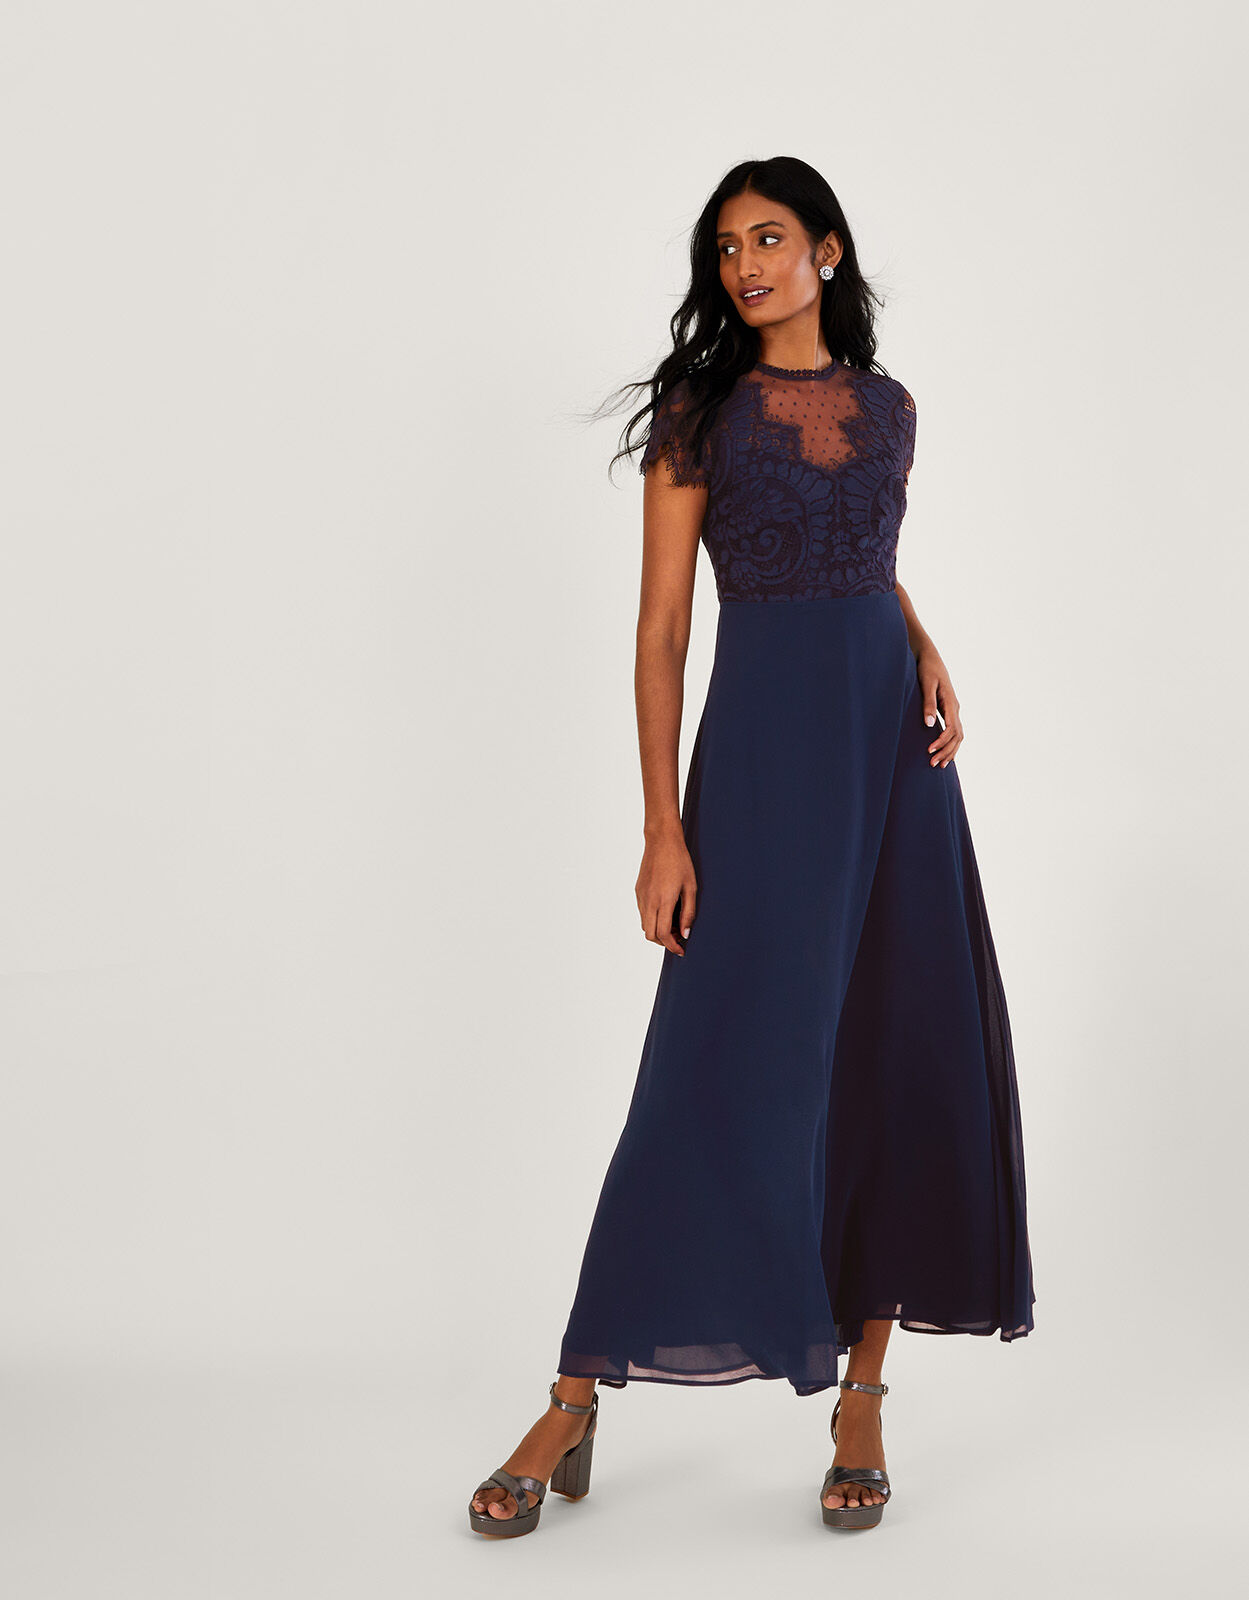 Race Day Dresses | Dresses for the Races | Monsoon UK